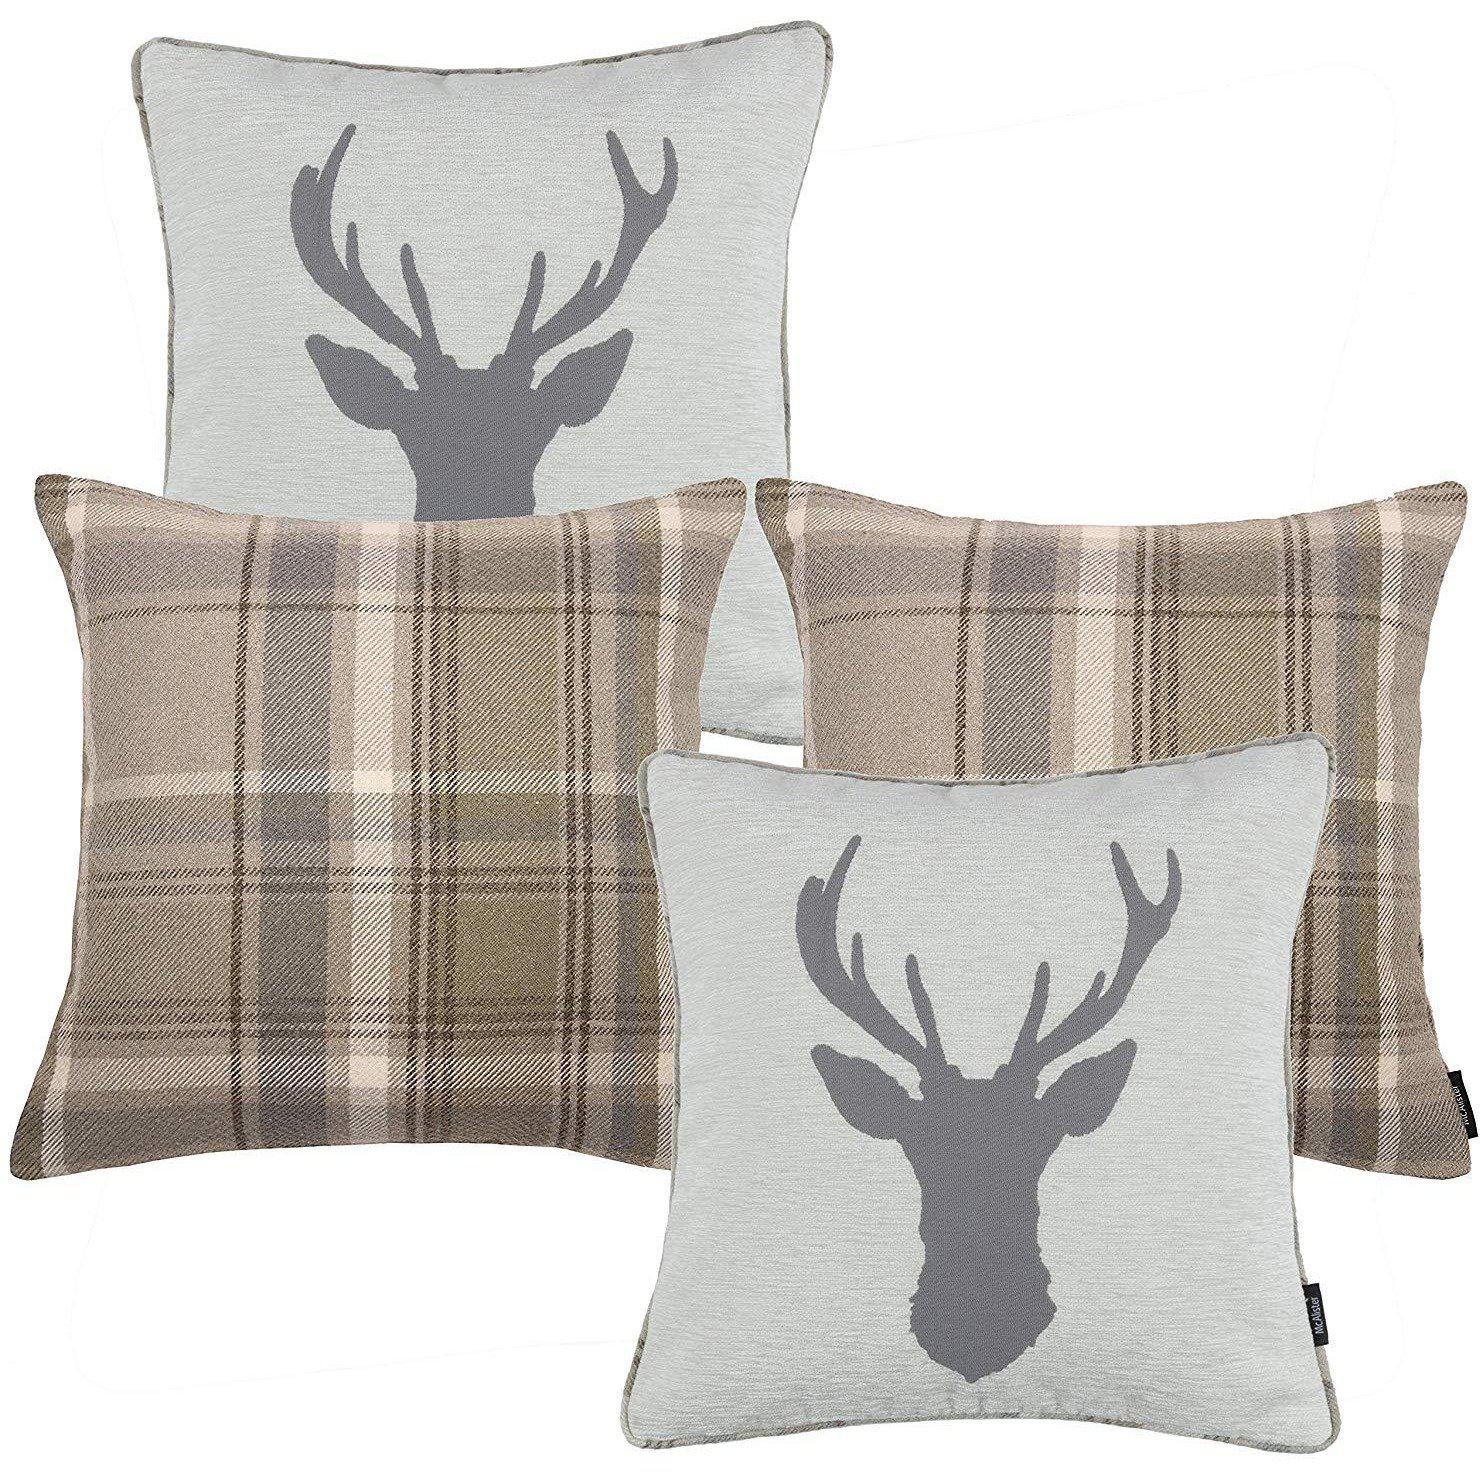 McAlister Textiles Stag Beige Grey Tartan 43cm x 43cm Cushion Set Cushions and Covers Set of 2 cushions 